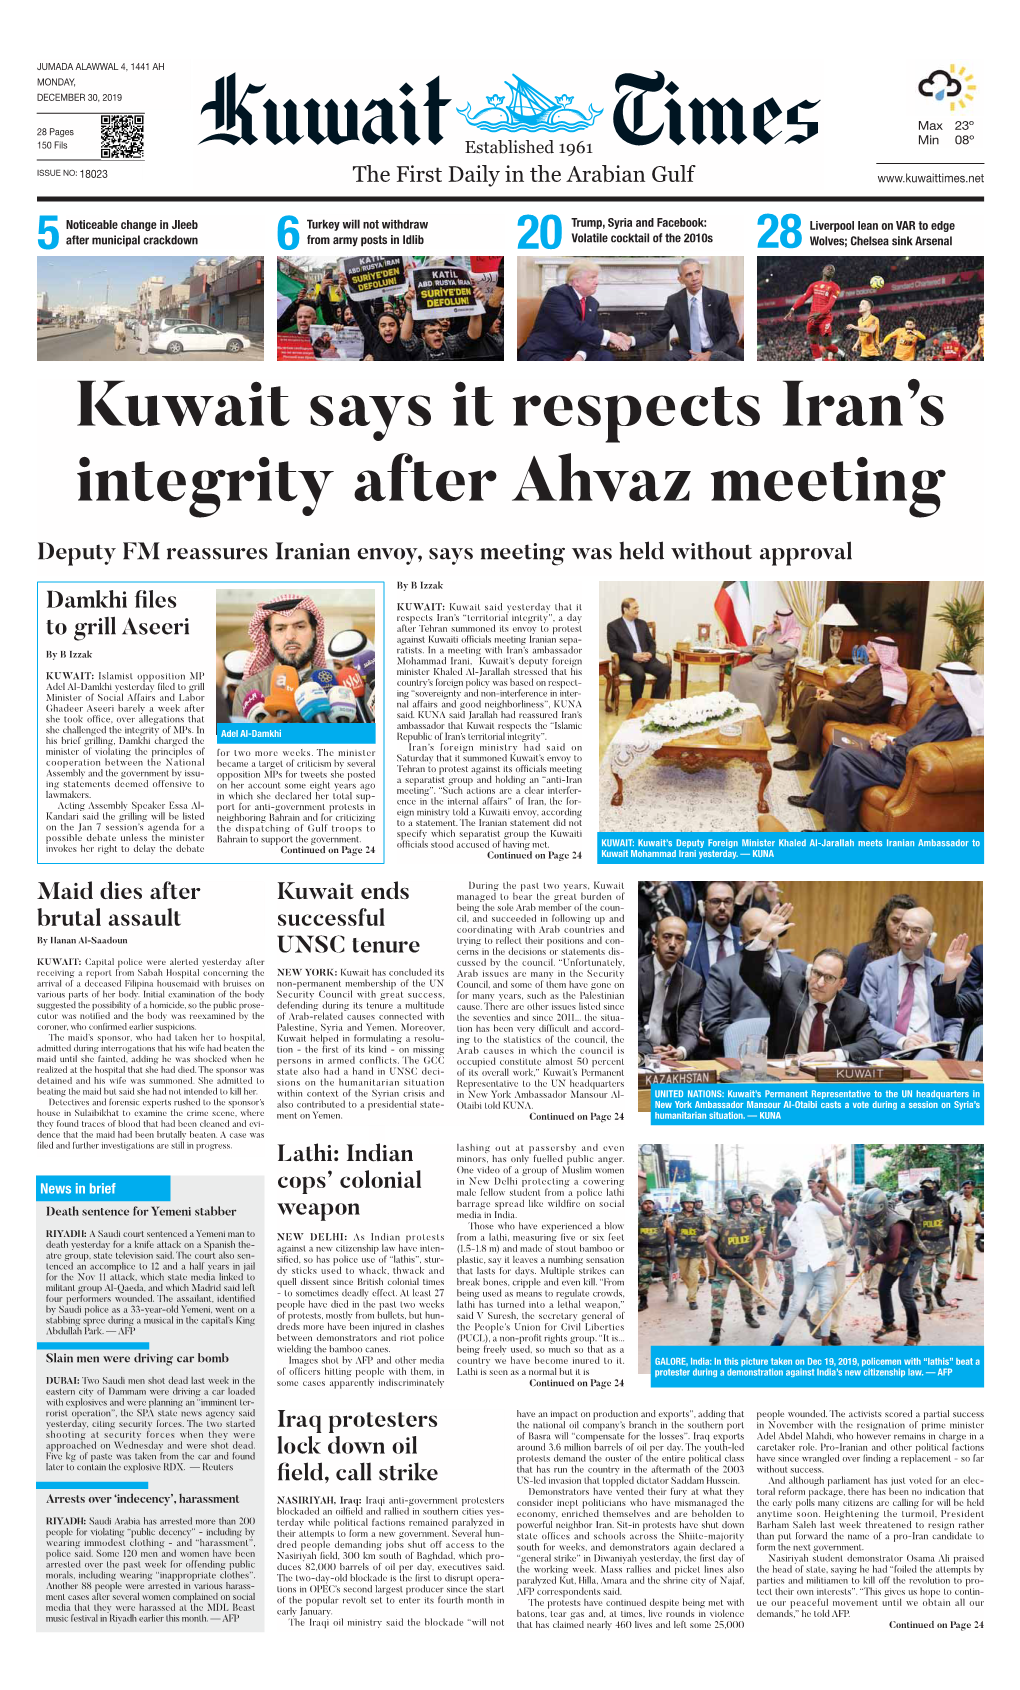 Kuwait Says It Respects Iran's Integrity After Ahvaz Meeting